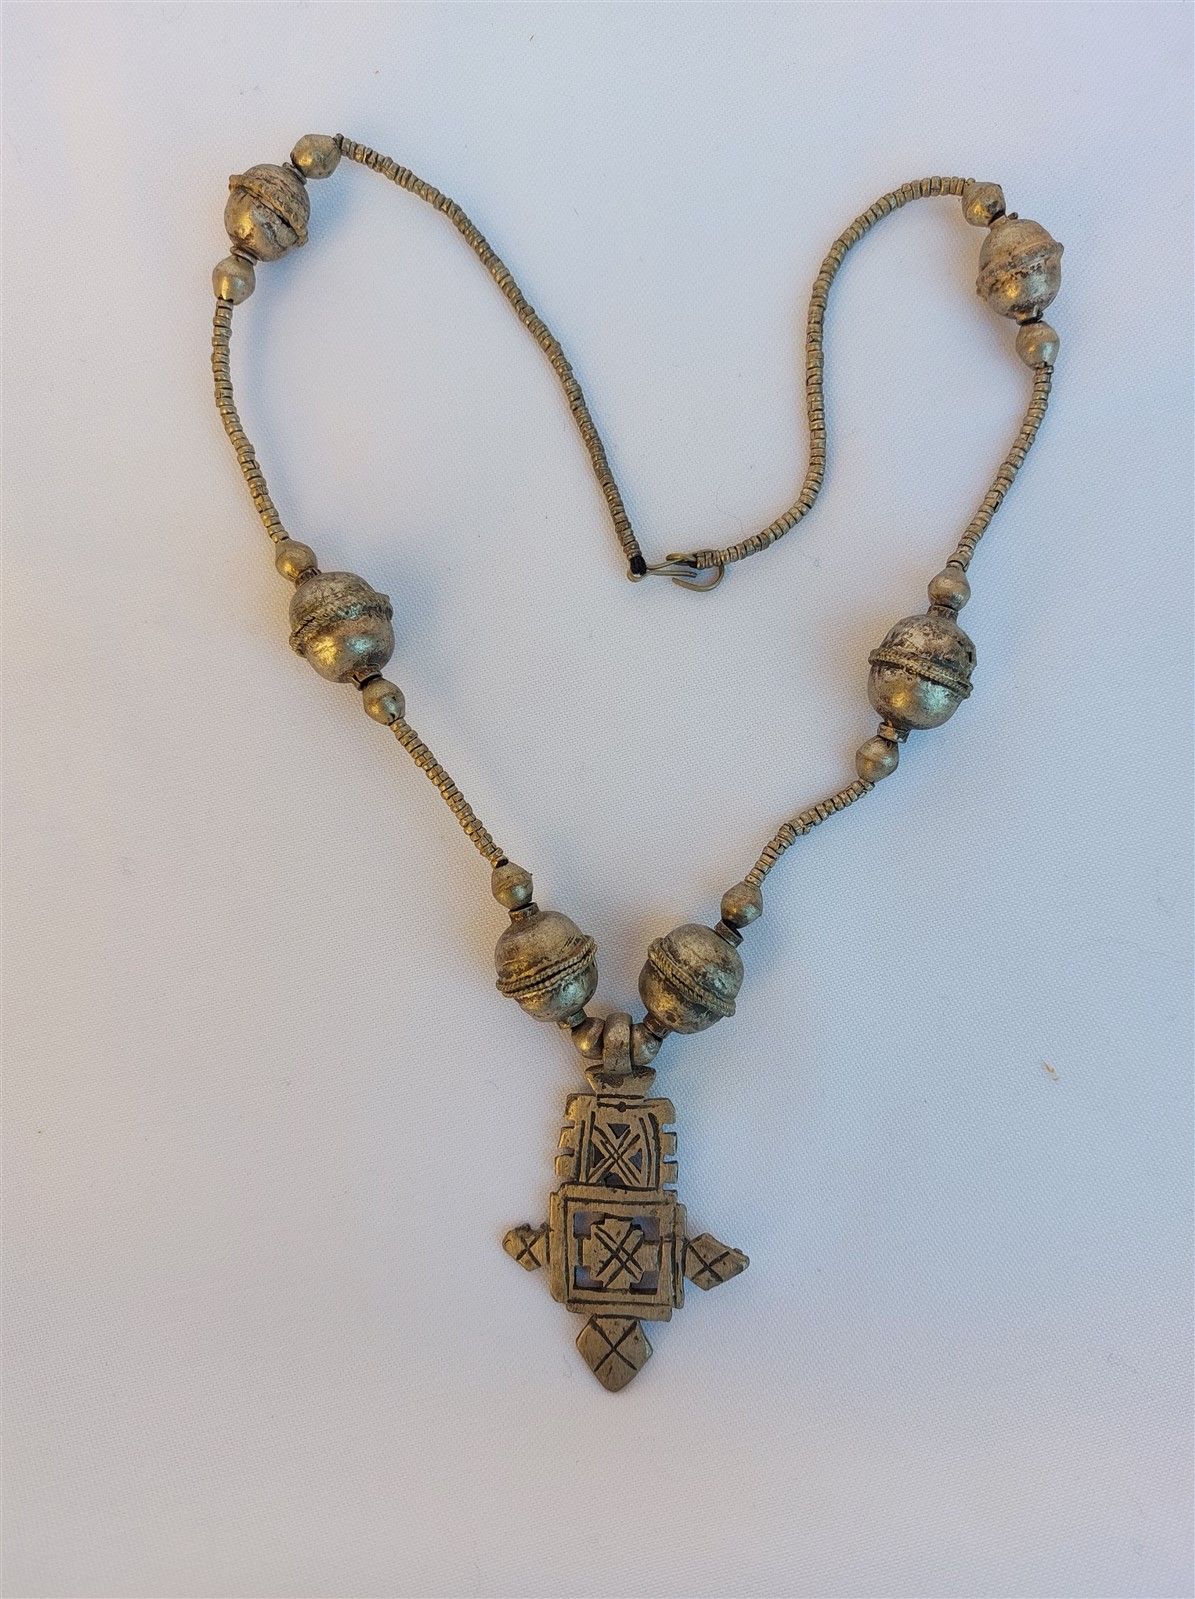 Null 1 Tuareg silver necklace with Southern cross motif